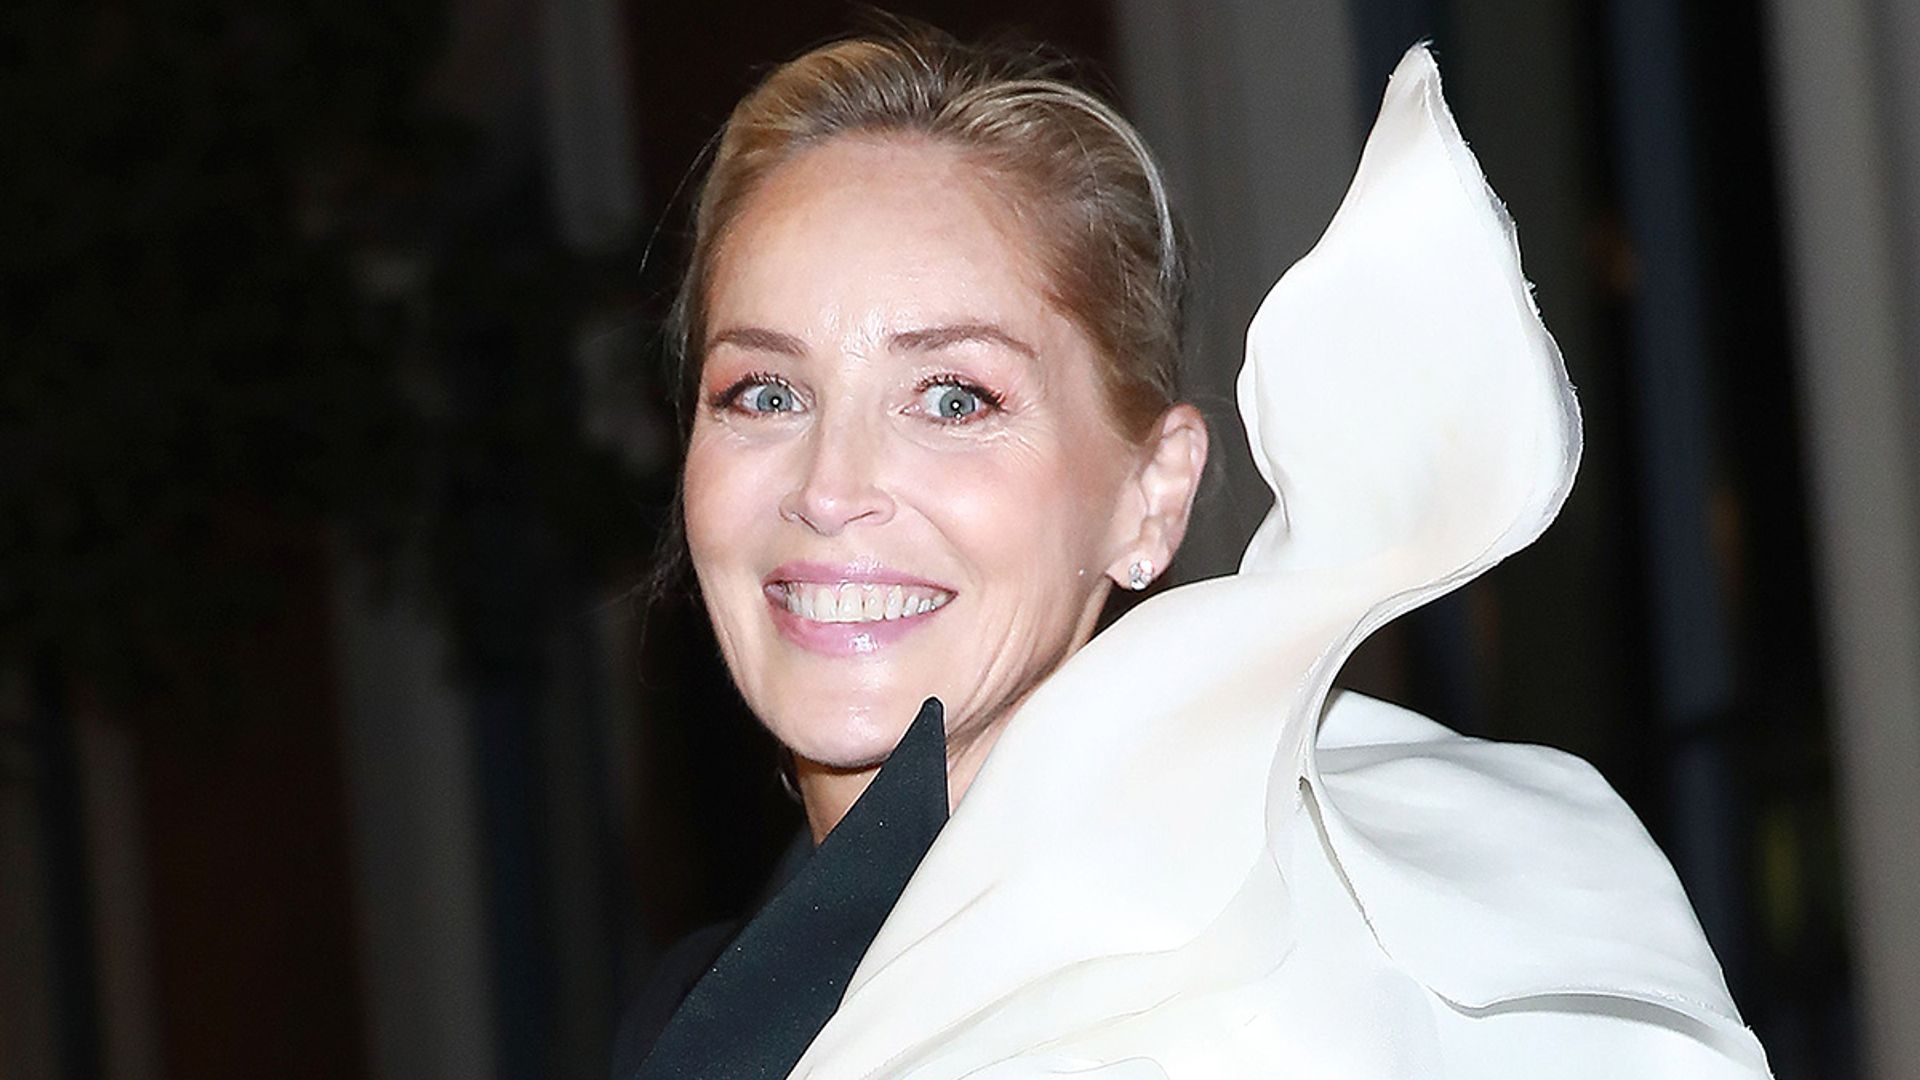 Sharon Stone delights fans with exciting announcement